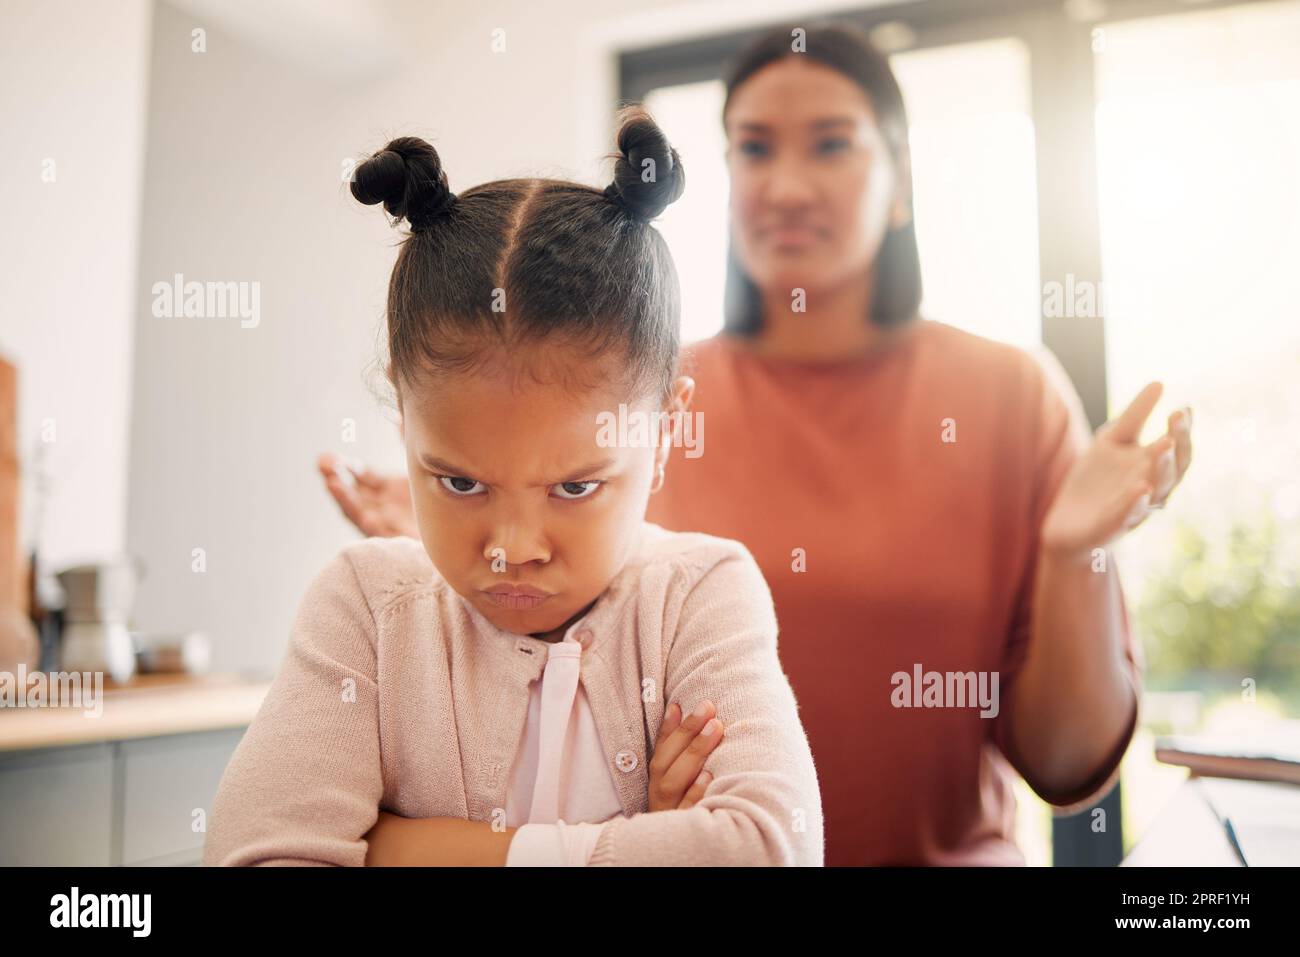 Angry little girl, unhappy and upset after fight or being scolded by mother, frowning with attitude and arms crossed. Naughty child looking offended with stressed single parent in background. Stock Photo